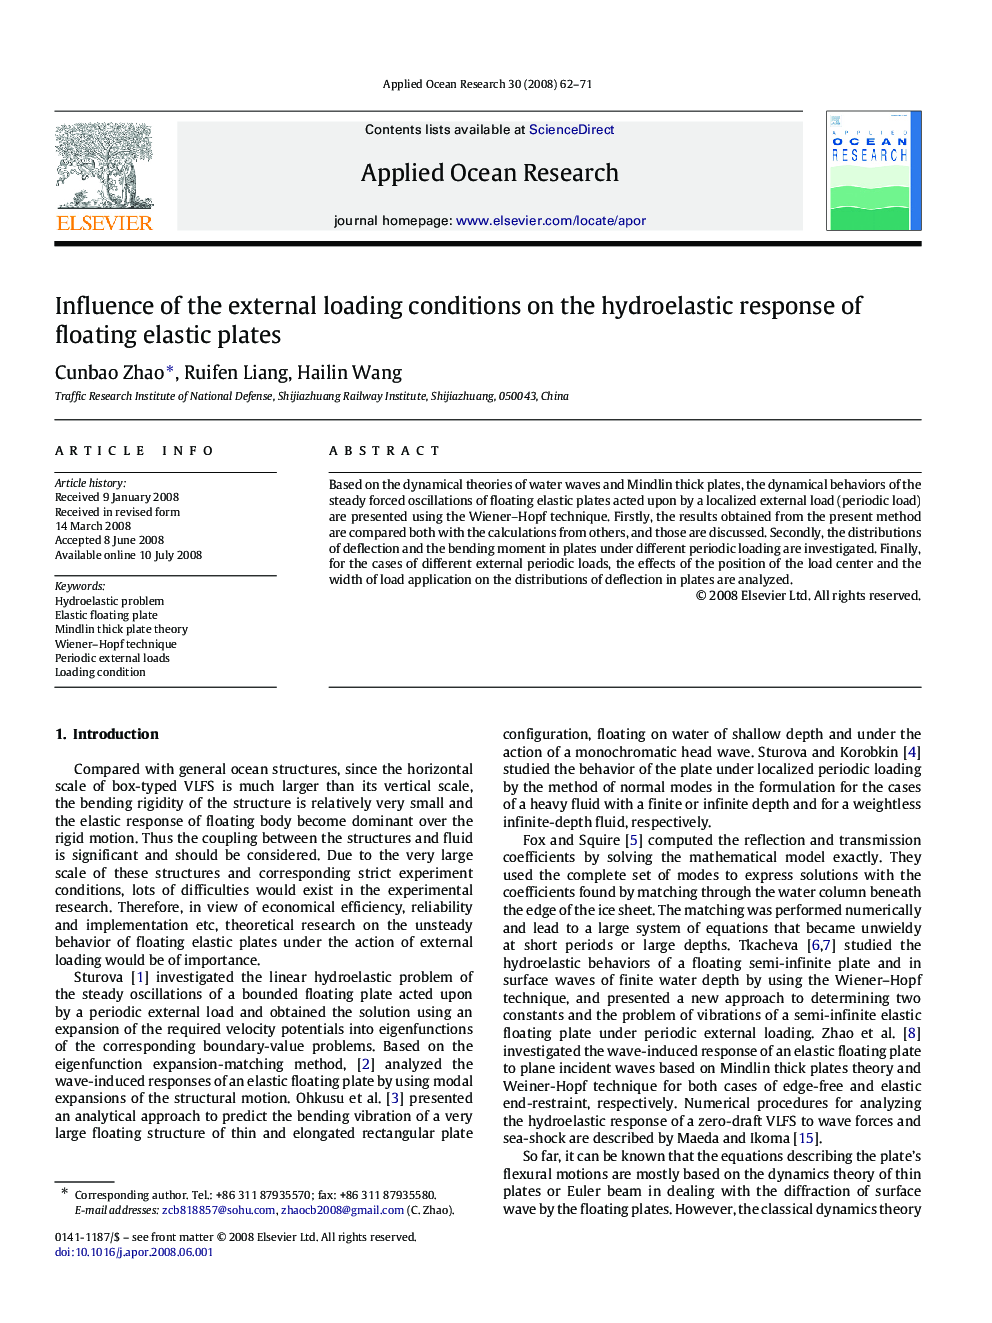 Influence of the external loading conditions on the hydroelastic response of floating elastic plates